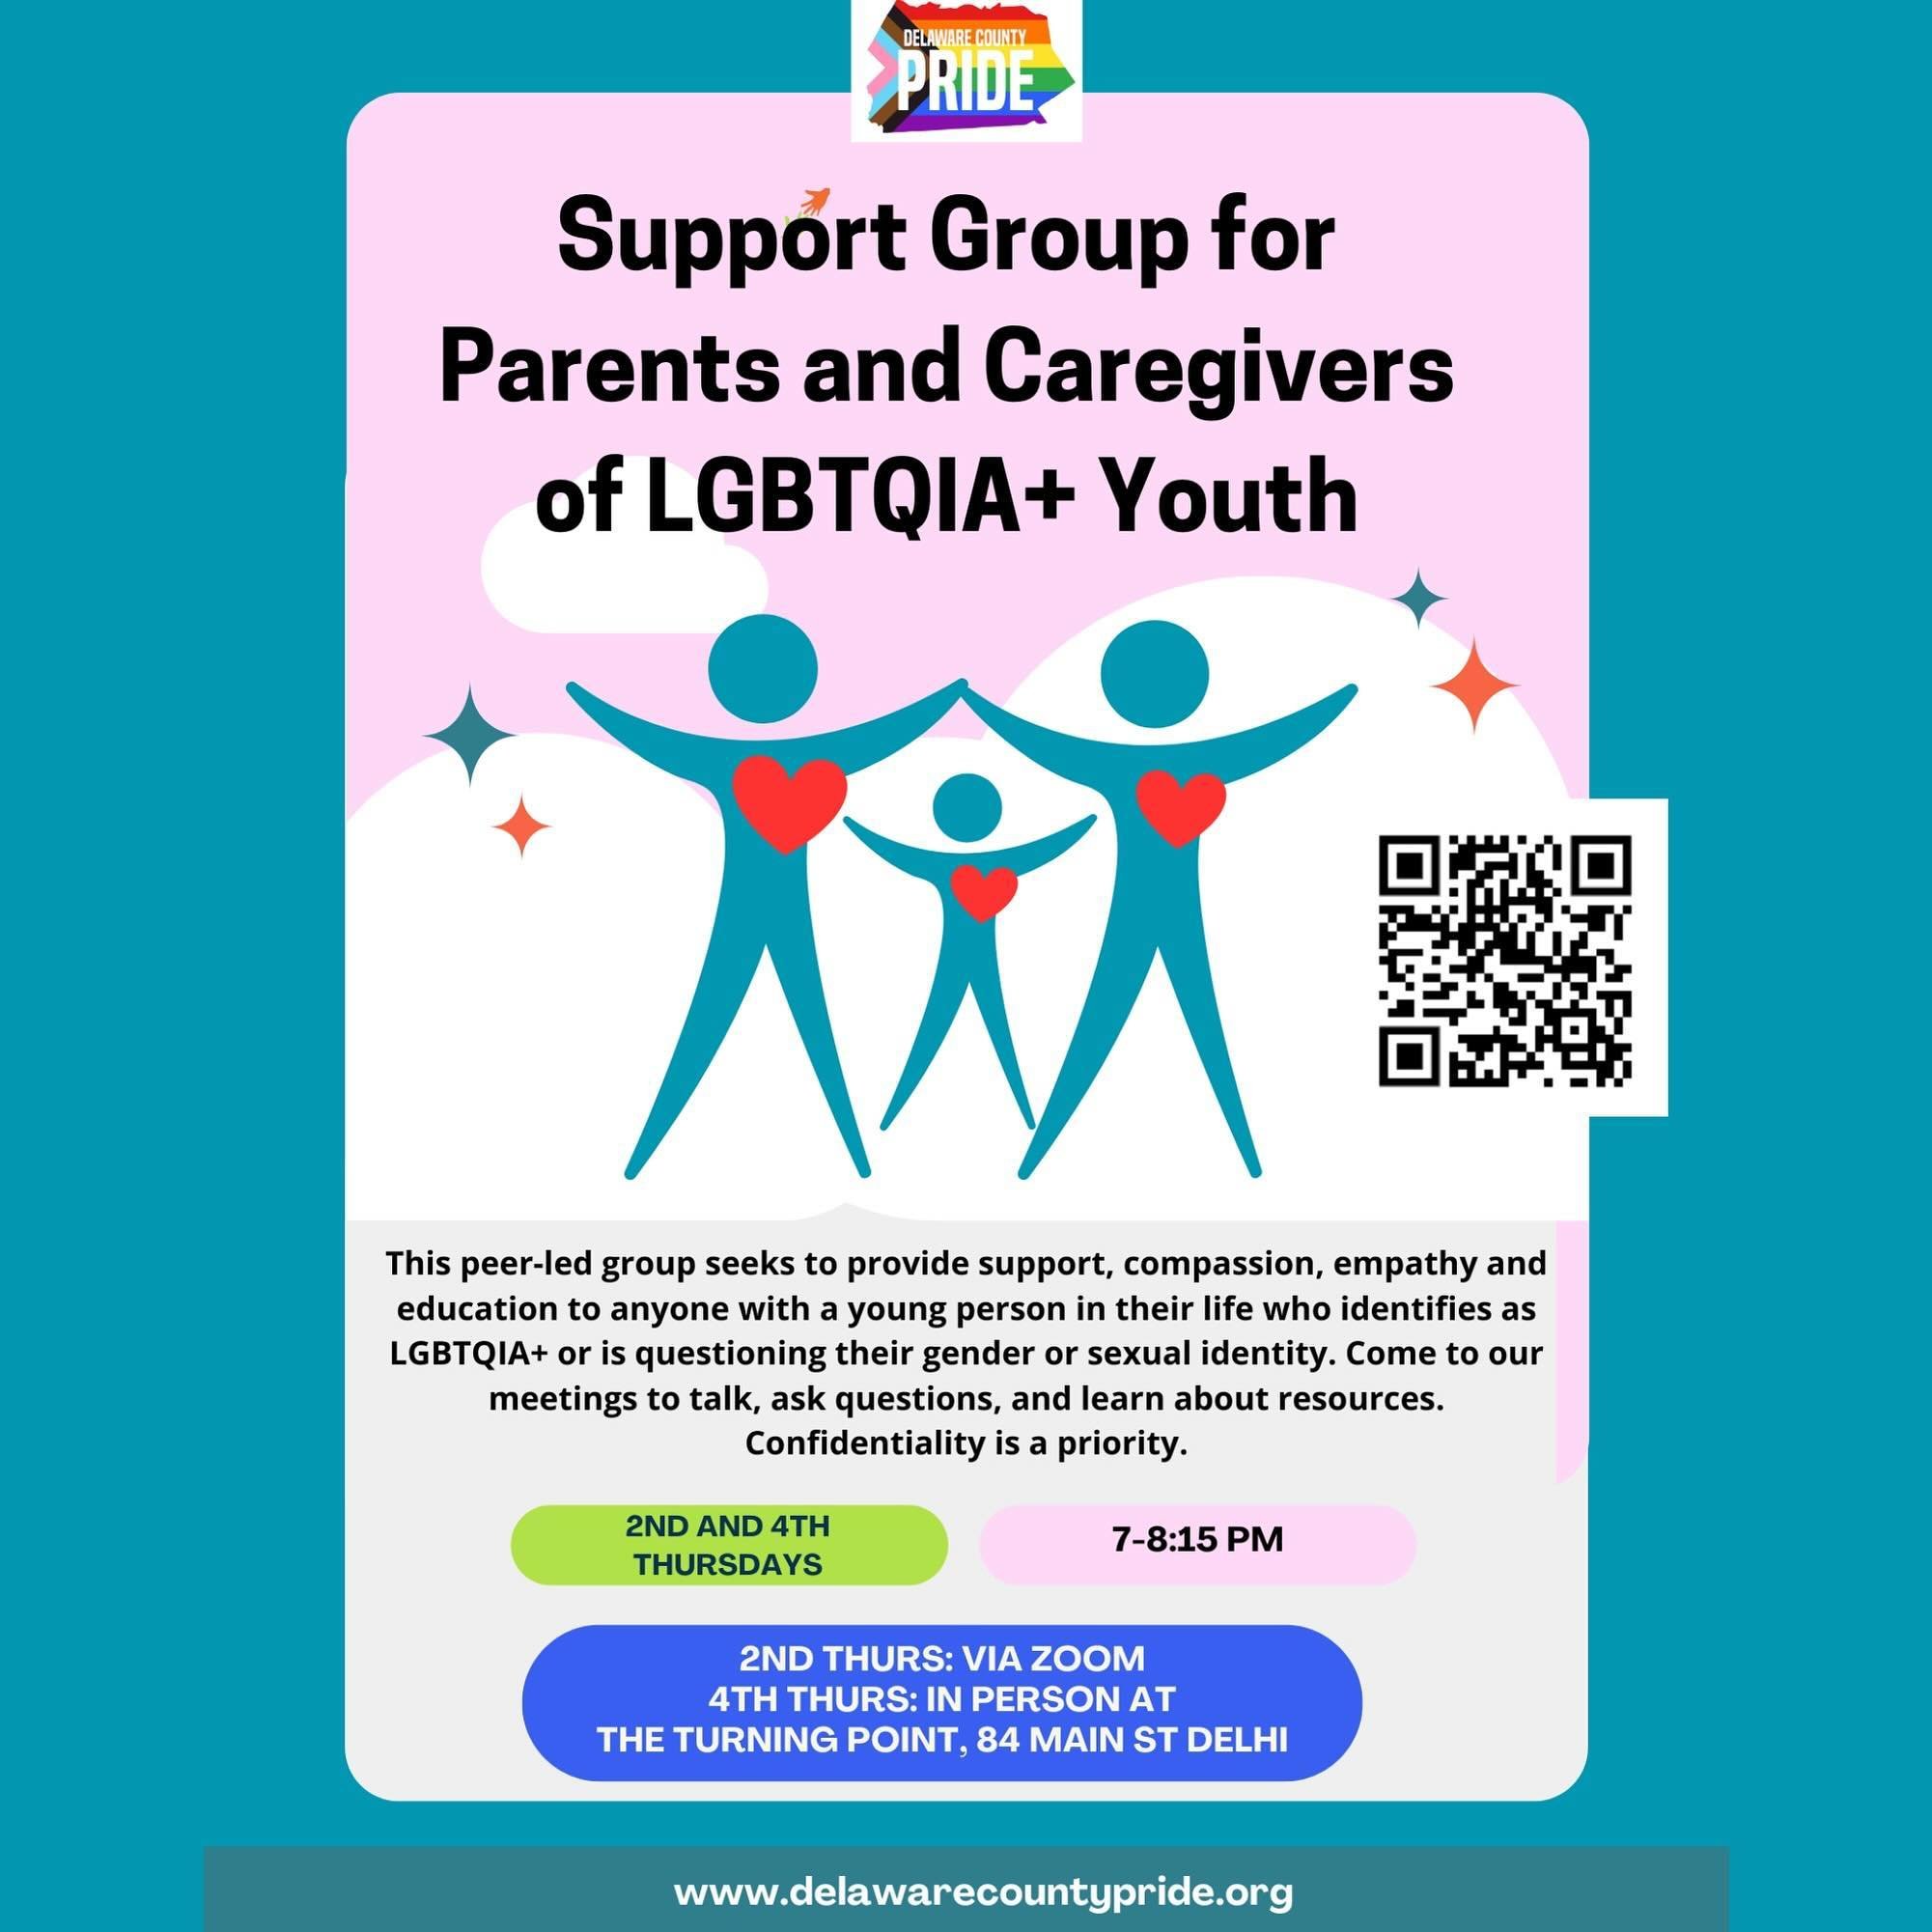 Our Support Group for Parents and Caregivers of LGBTQIA + Youth meets the 2nd Thursday of every month via Zoom (email info@delawarecountypride.org for the link), and the fourth Thursday of every month at The Turning Point in Delhi. 

This peer-led gr